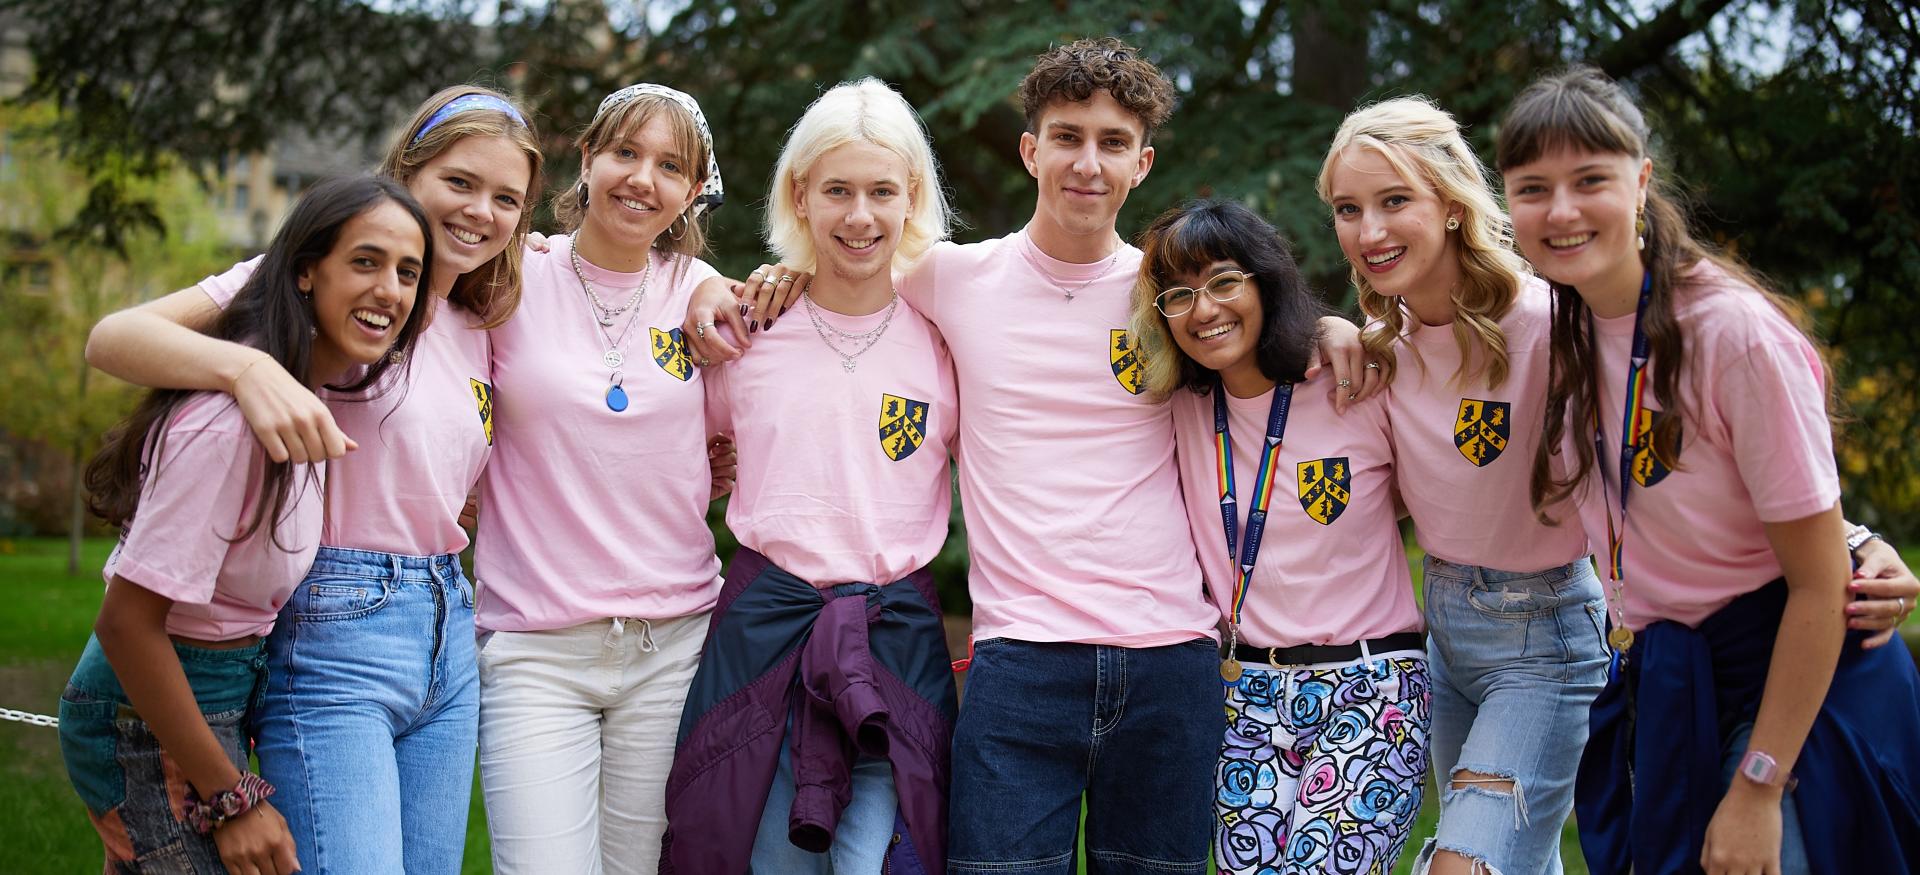 A group of trinity JCR freshers reps stand with their arms around each other smiling. They are wearing matching pink shirts.